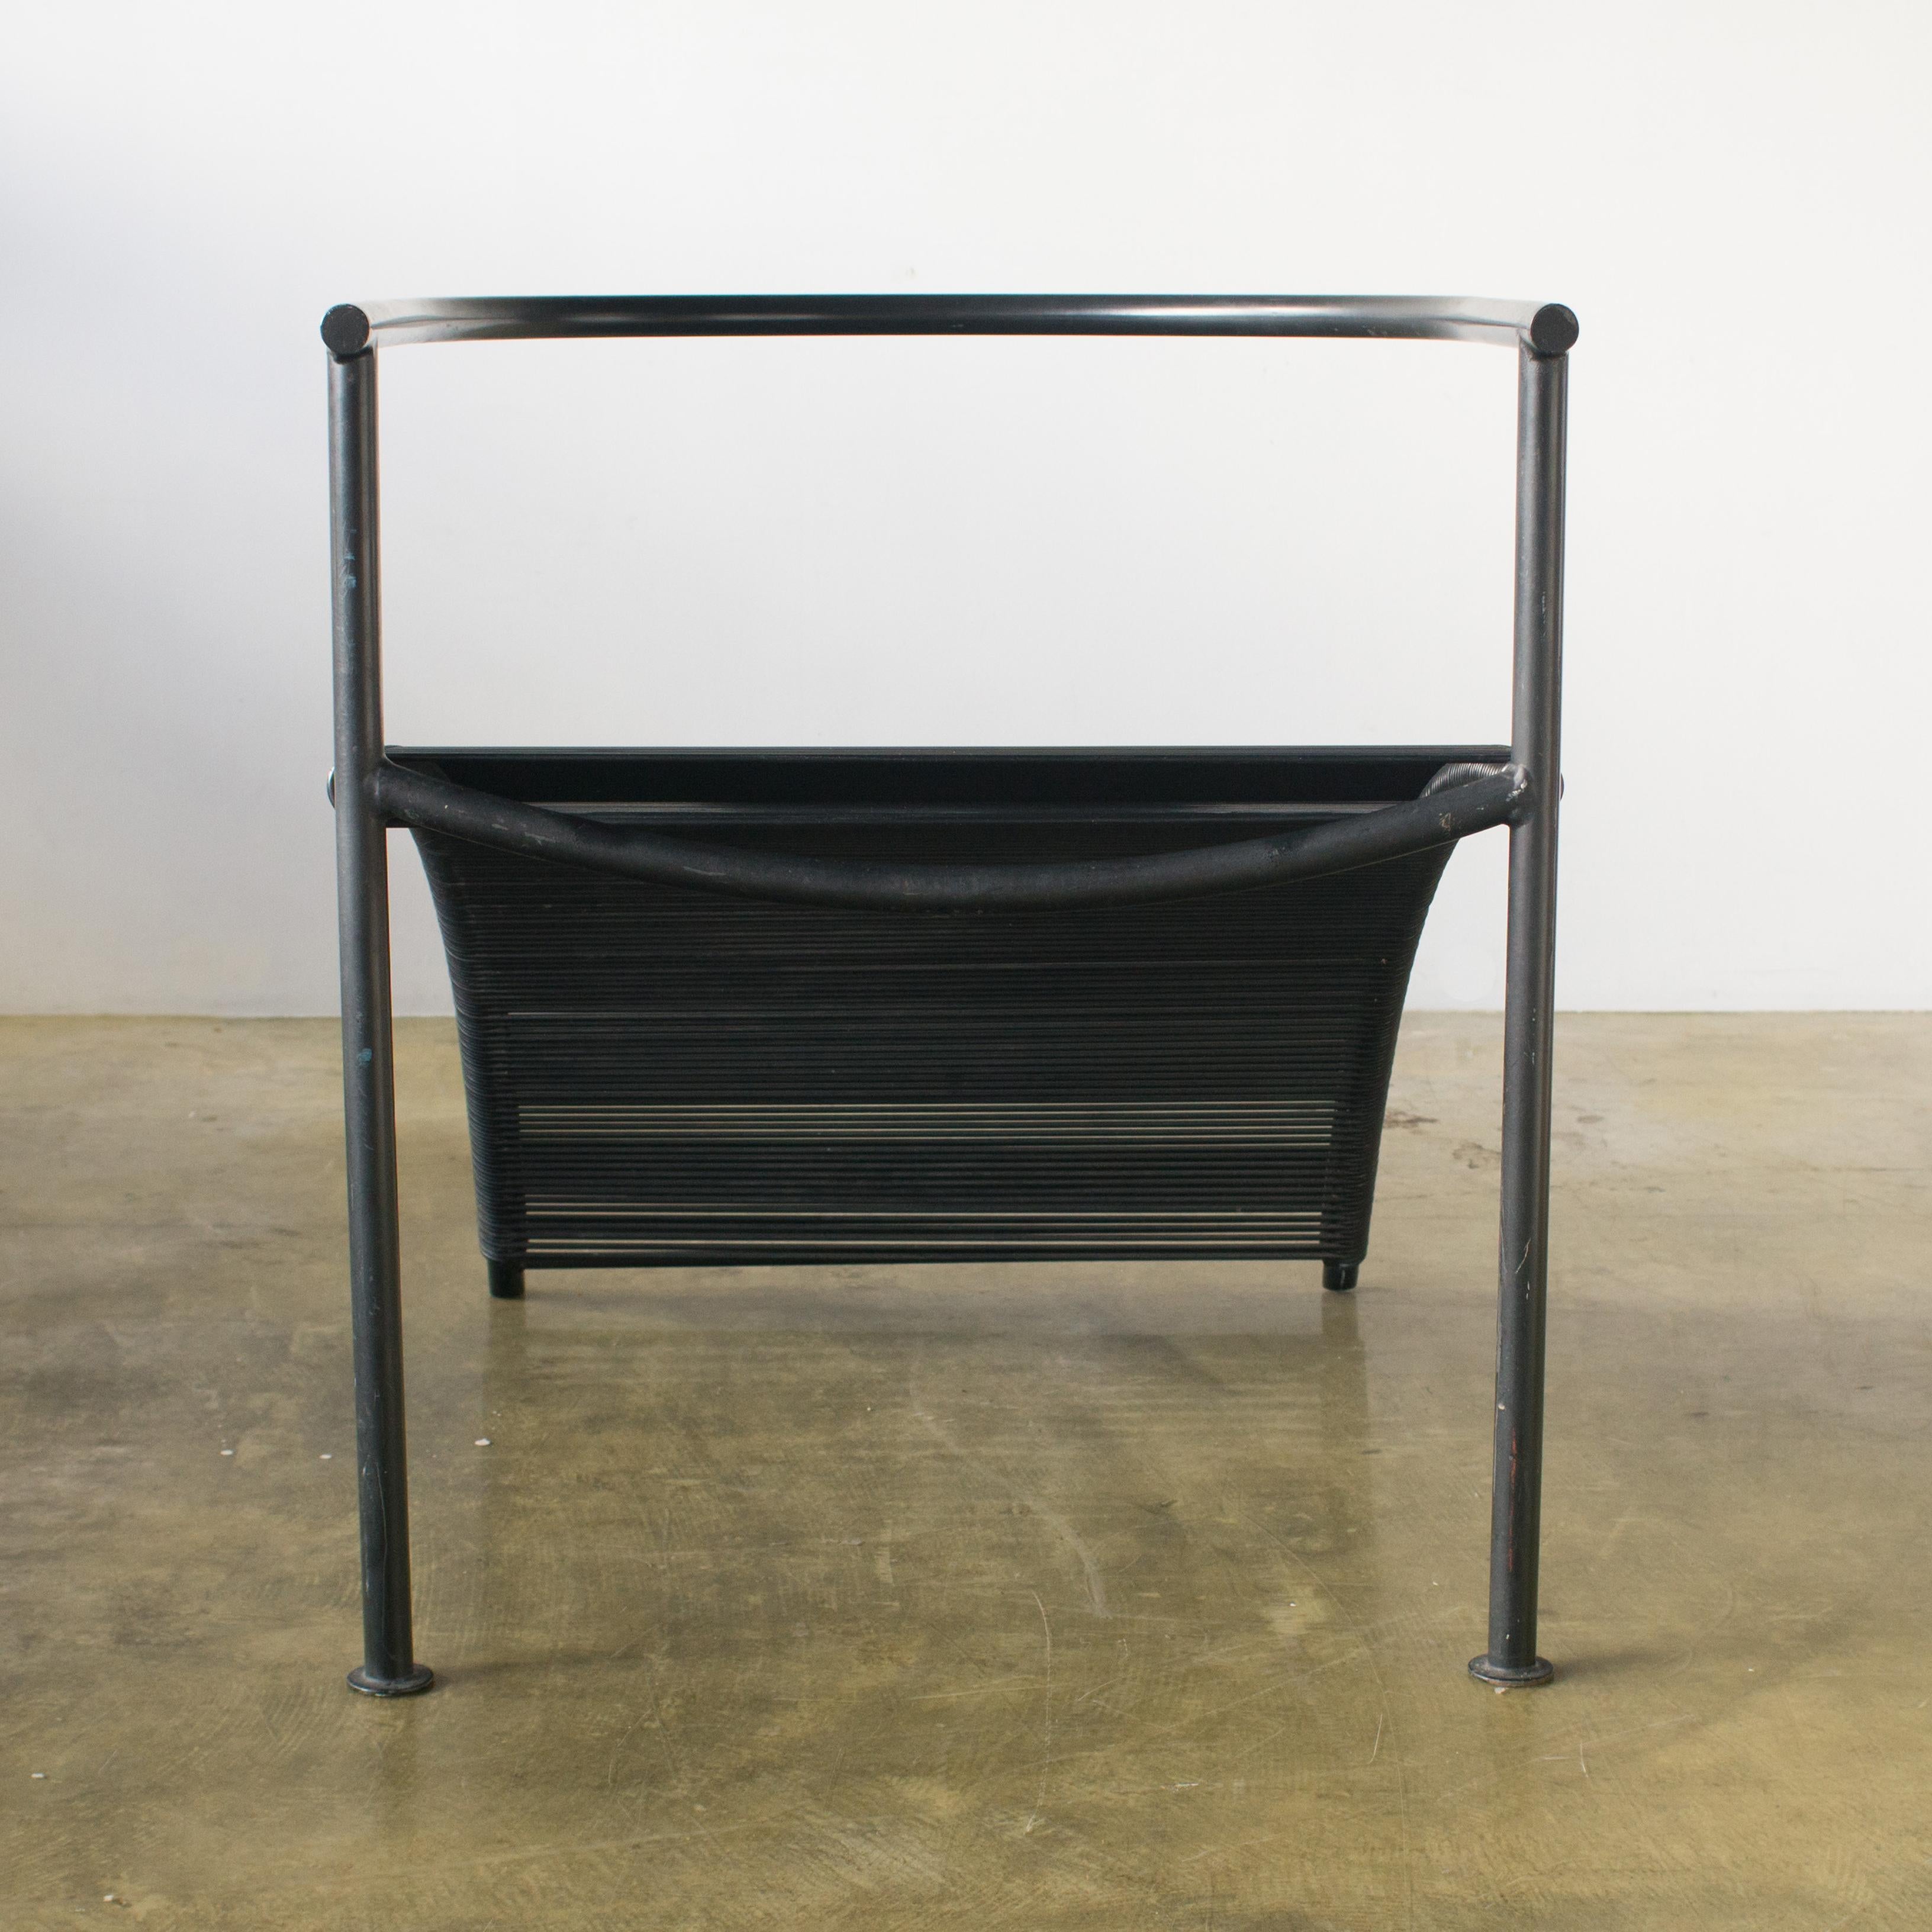 Pat Conley 1 designed by Philippe Starck.
Collectable piece of 1980s Starck works. Seat is pale green.
  